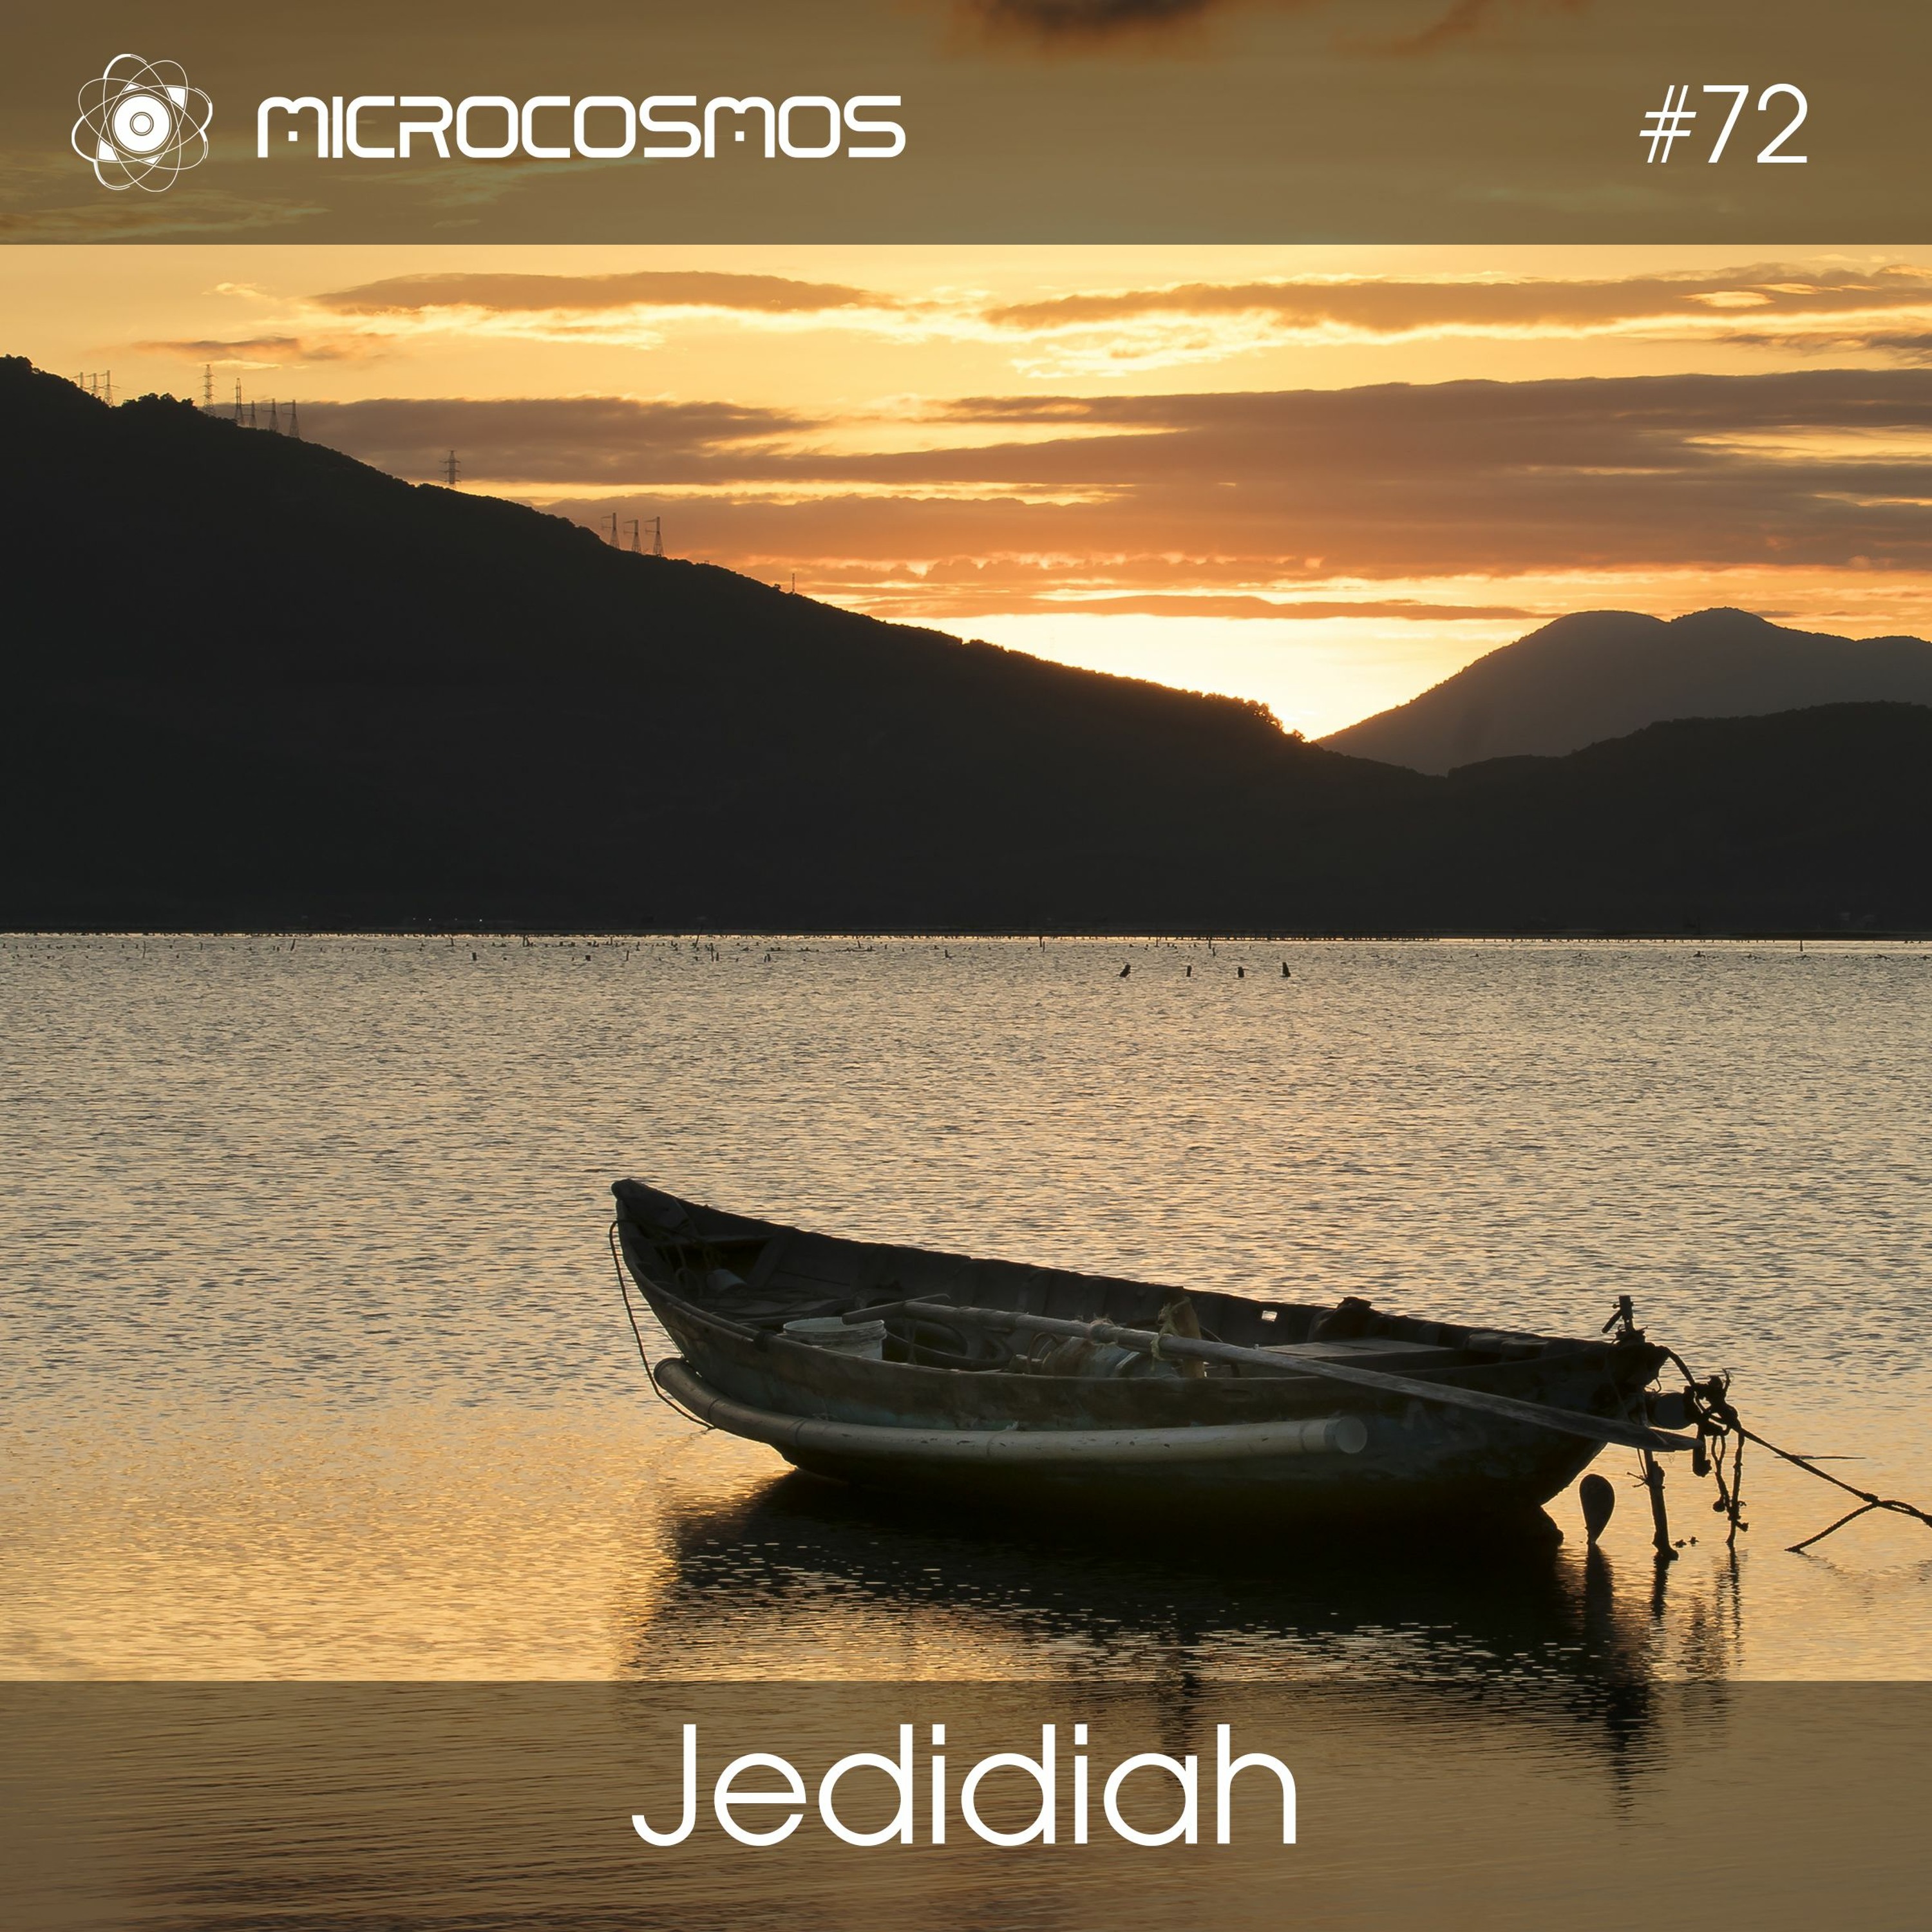 Jedidiah — Microcosmos Chillout & Ambient Podcast 072